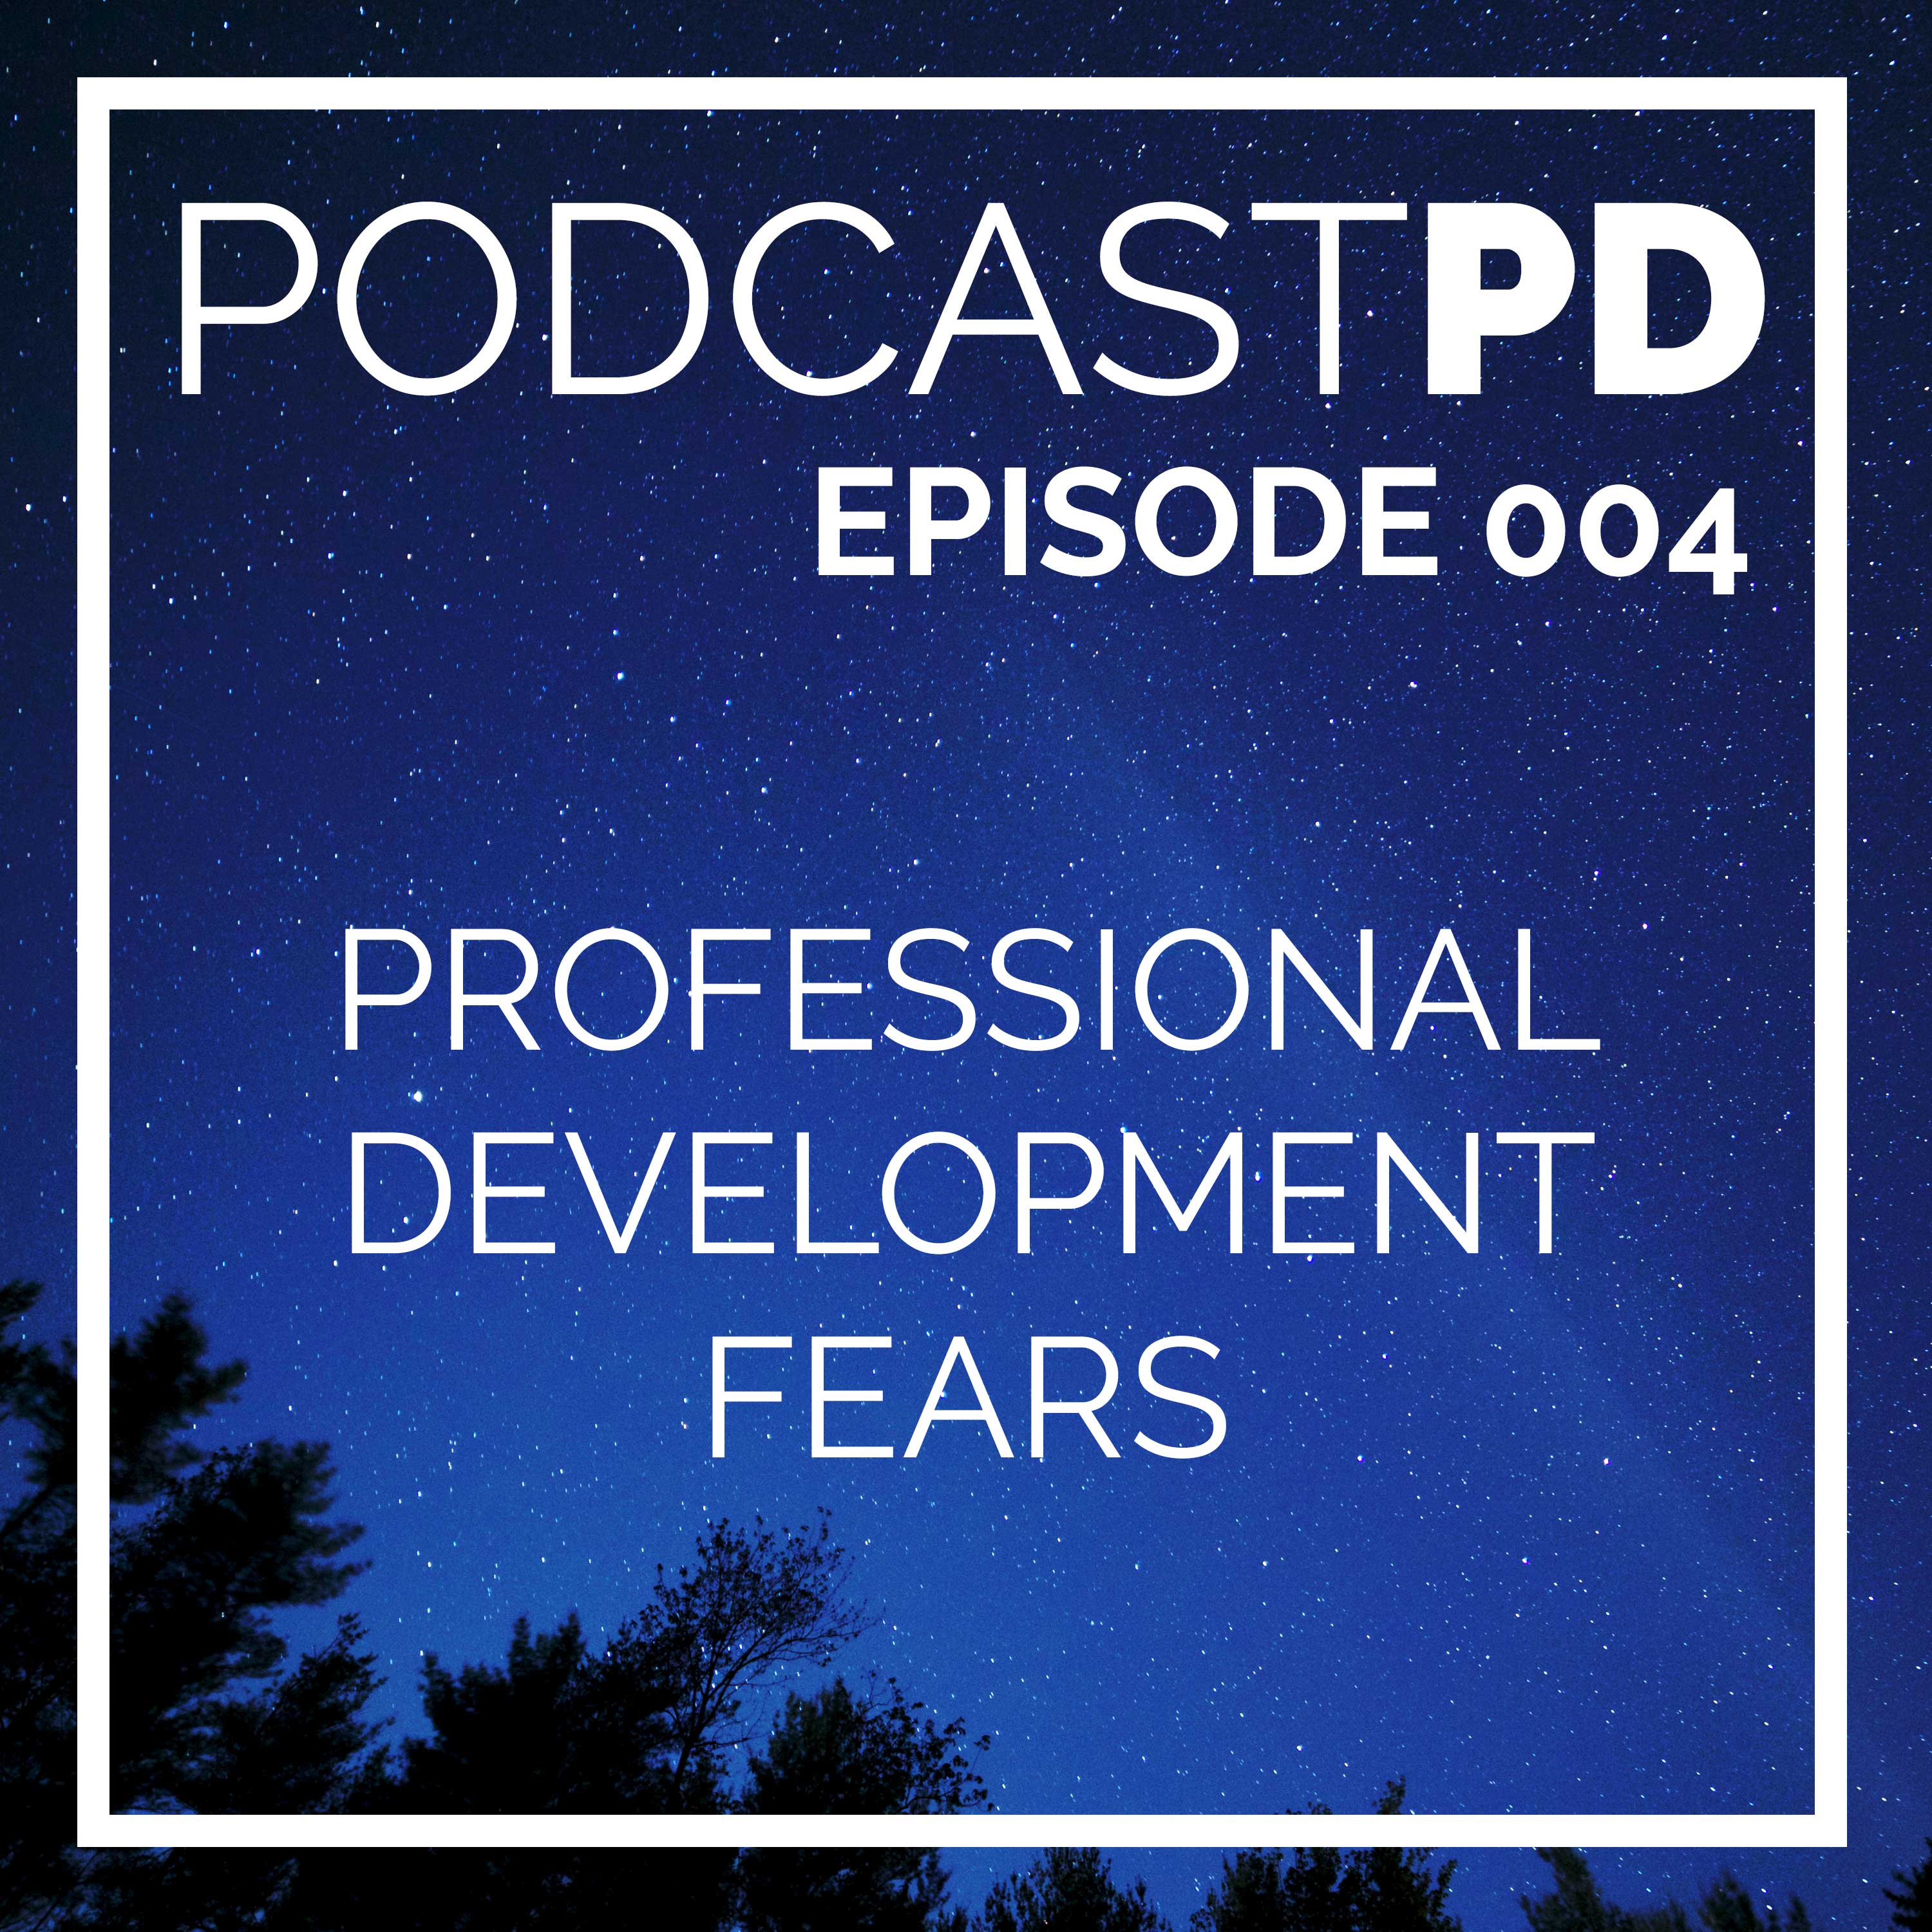 Professional Development Fears - PPD004 Image